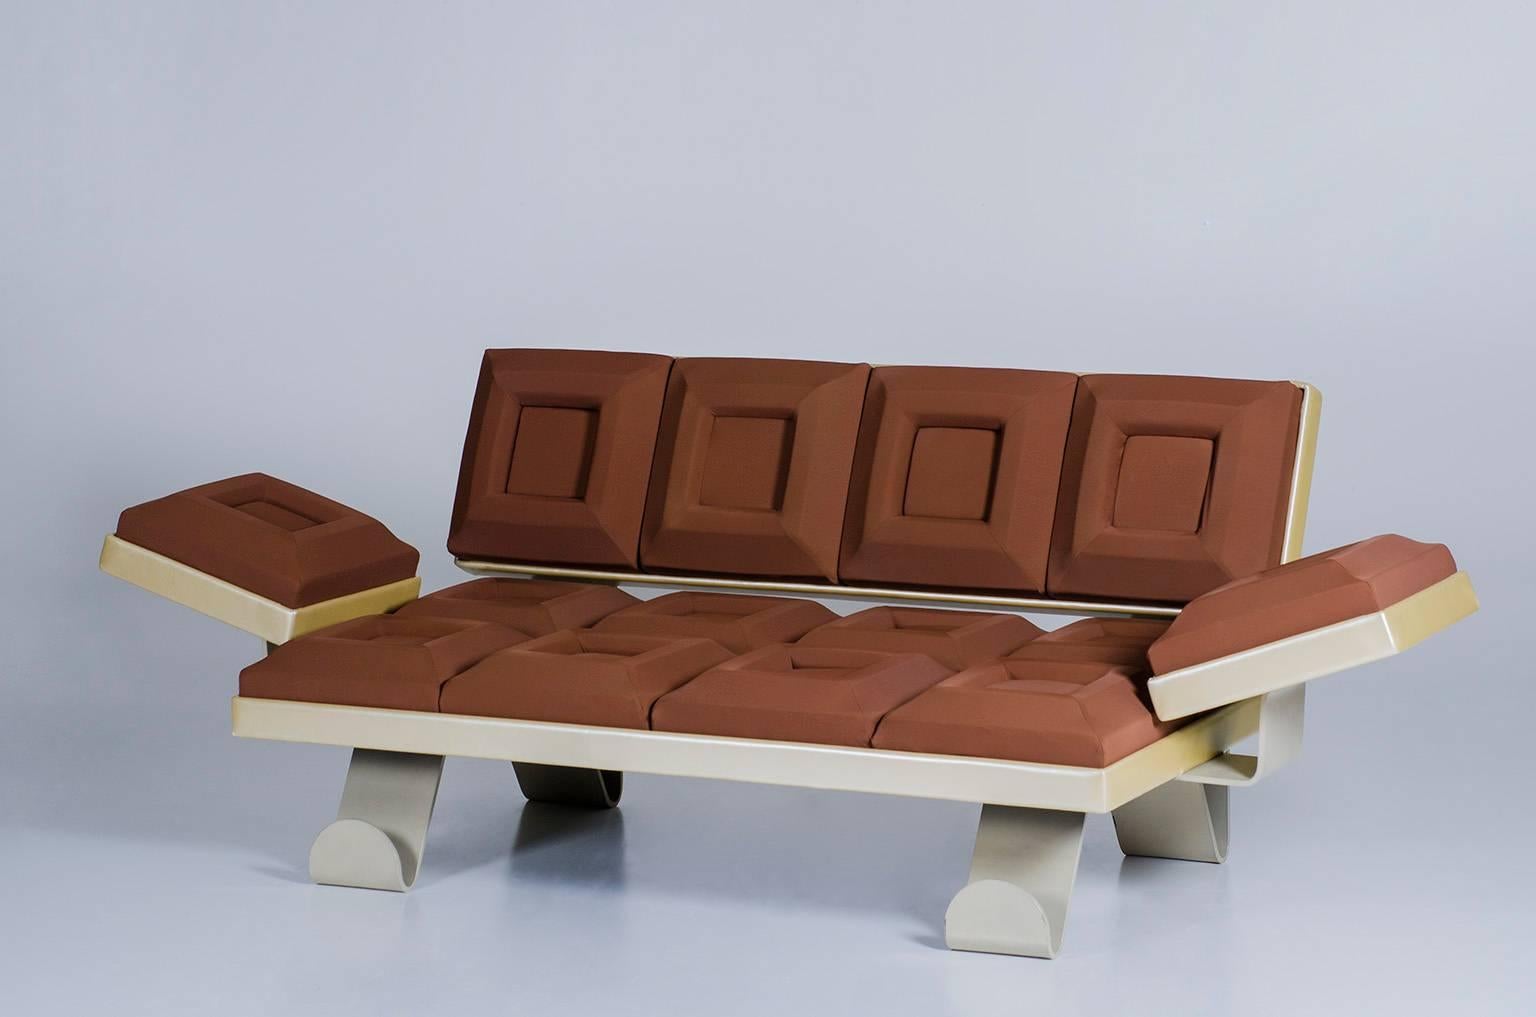 Chocolate will save the world.
By matching two or more squares, the food of the gods becomes a dream come true.
Benches, dormeuse, seating, sofas, comfortable chaise longue will fulfill the spaces and desires of every gourmet.
Powder-coated